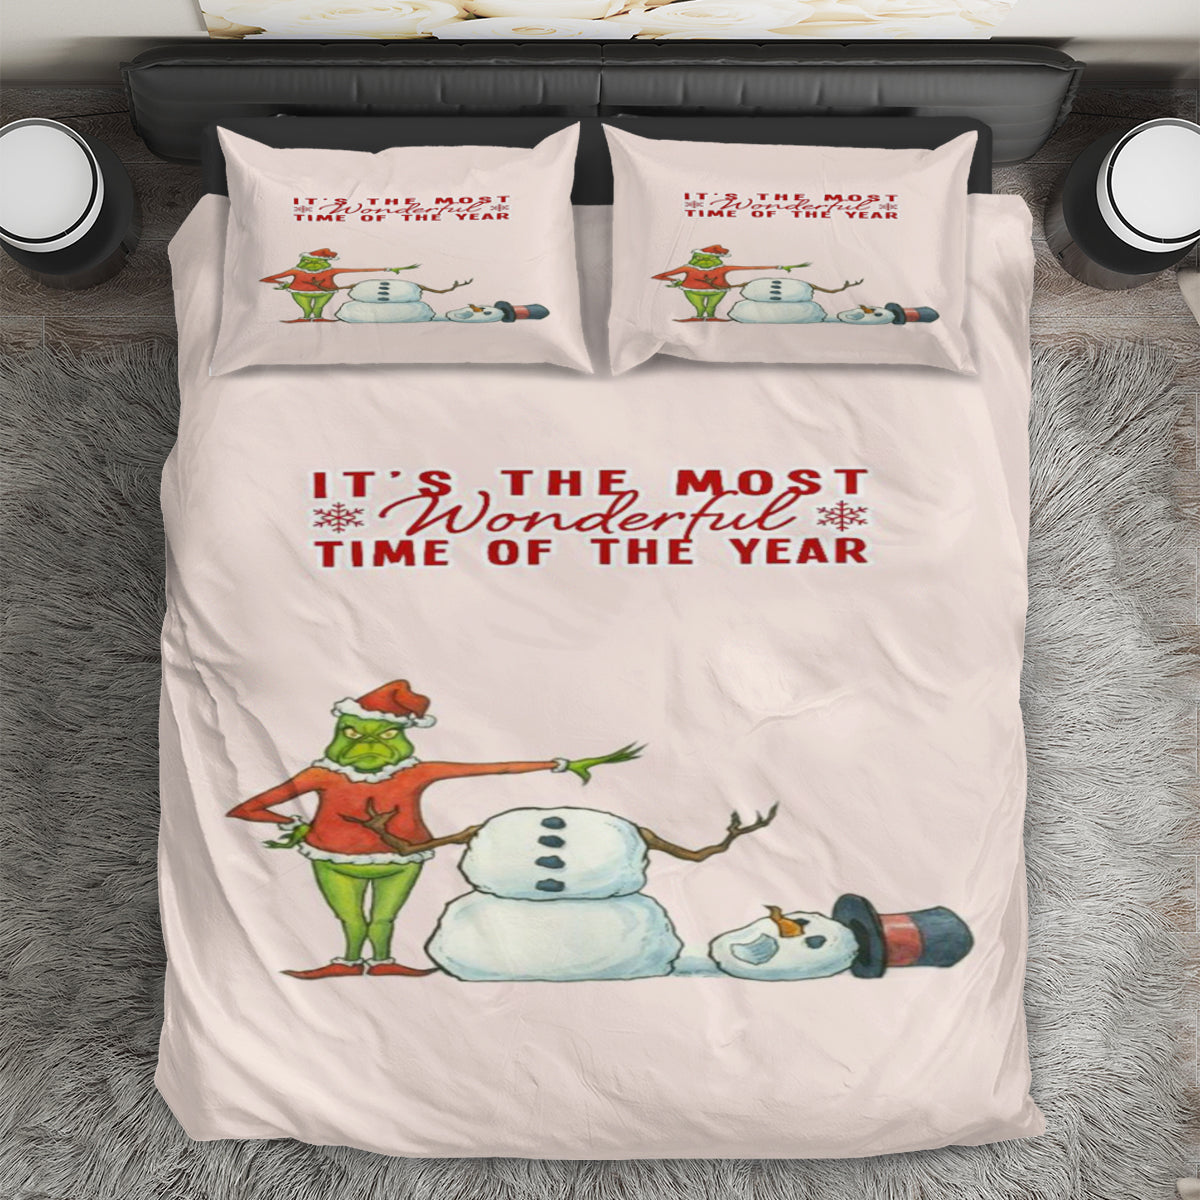 The Grinch Christmas It's The Most Wonderful Time 3PCS Bedding Set Duvet Cover And Pillow Cases Gift For Fan